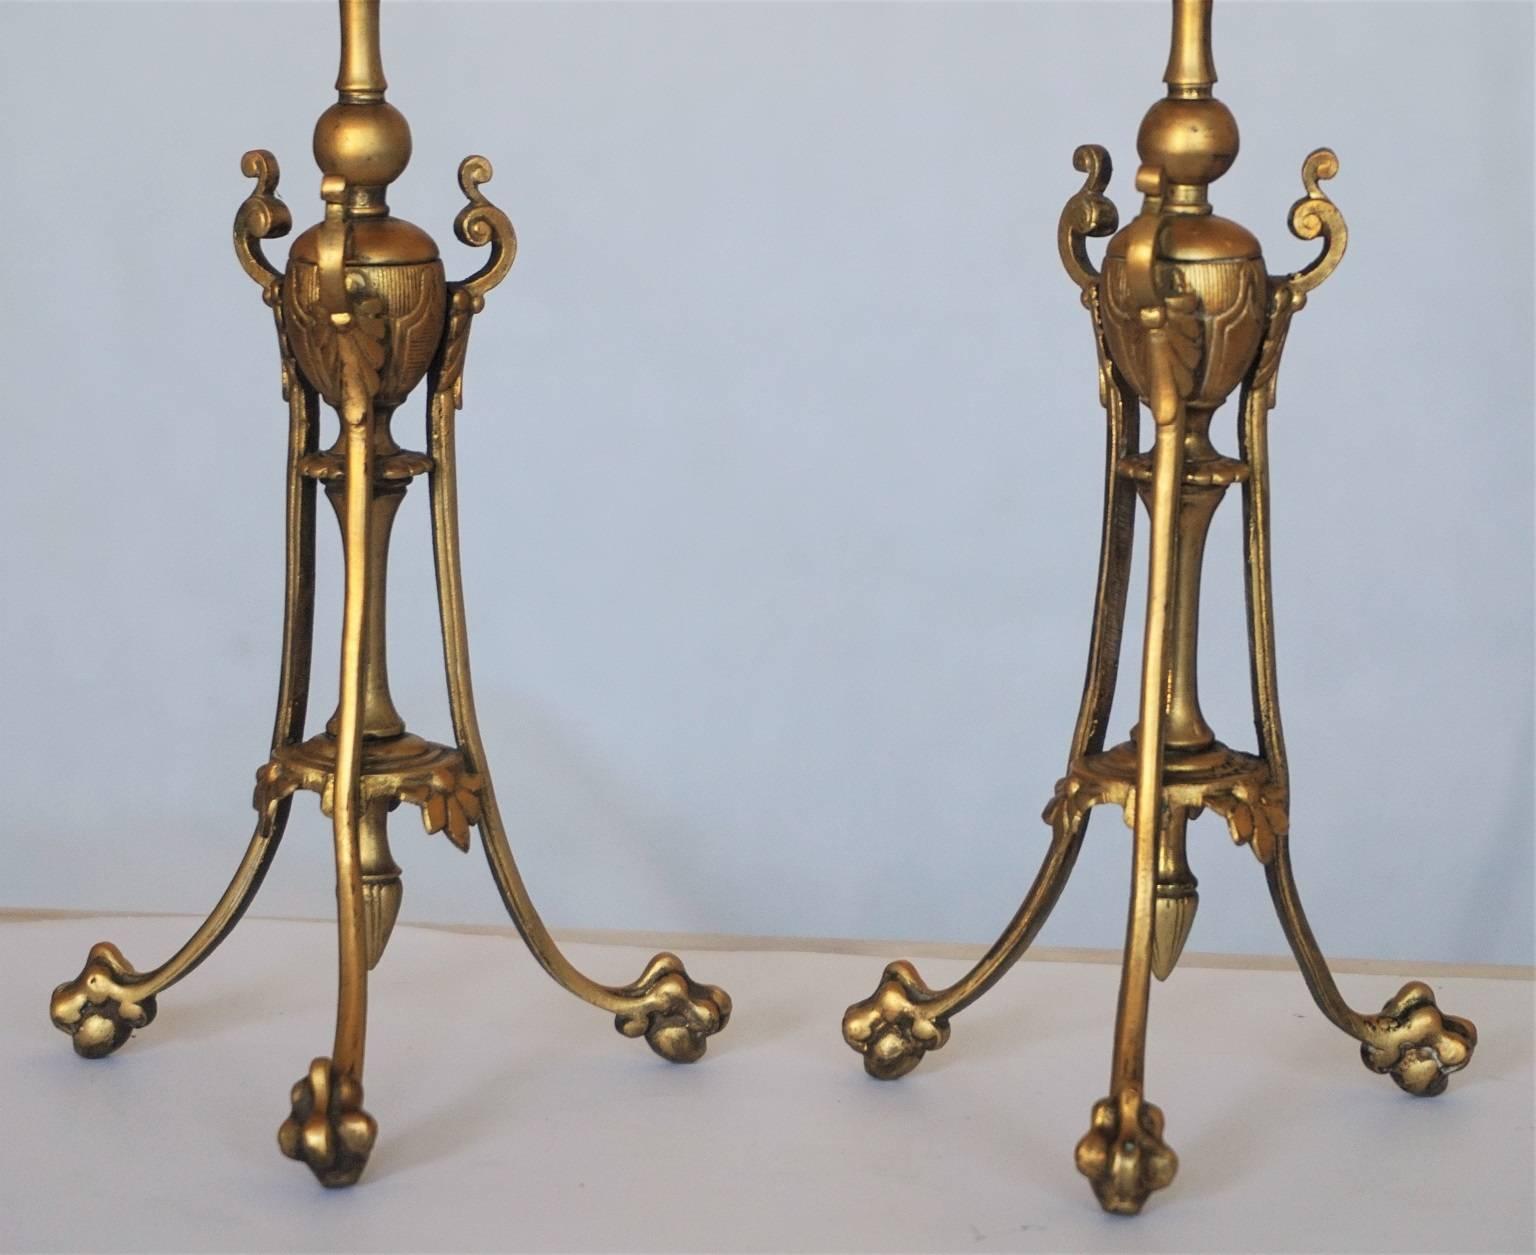 Mid-19th Century Pair of French Empire Style Gilt Bronze Candleholders For Sale 1